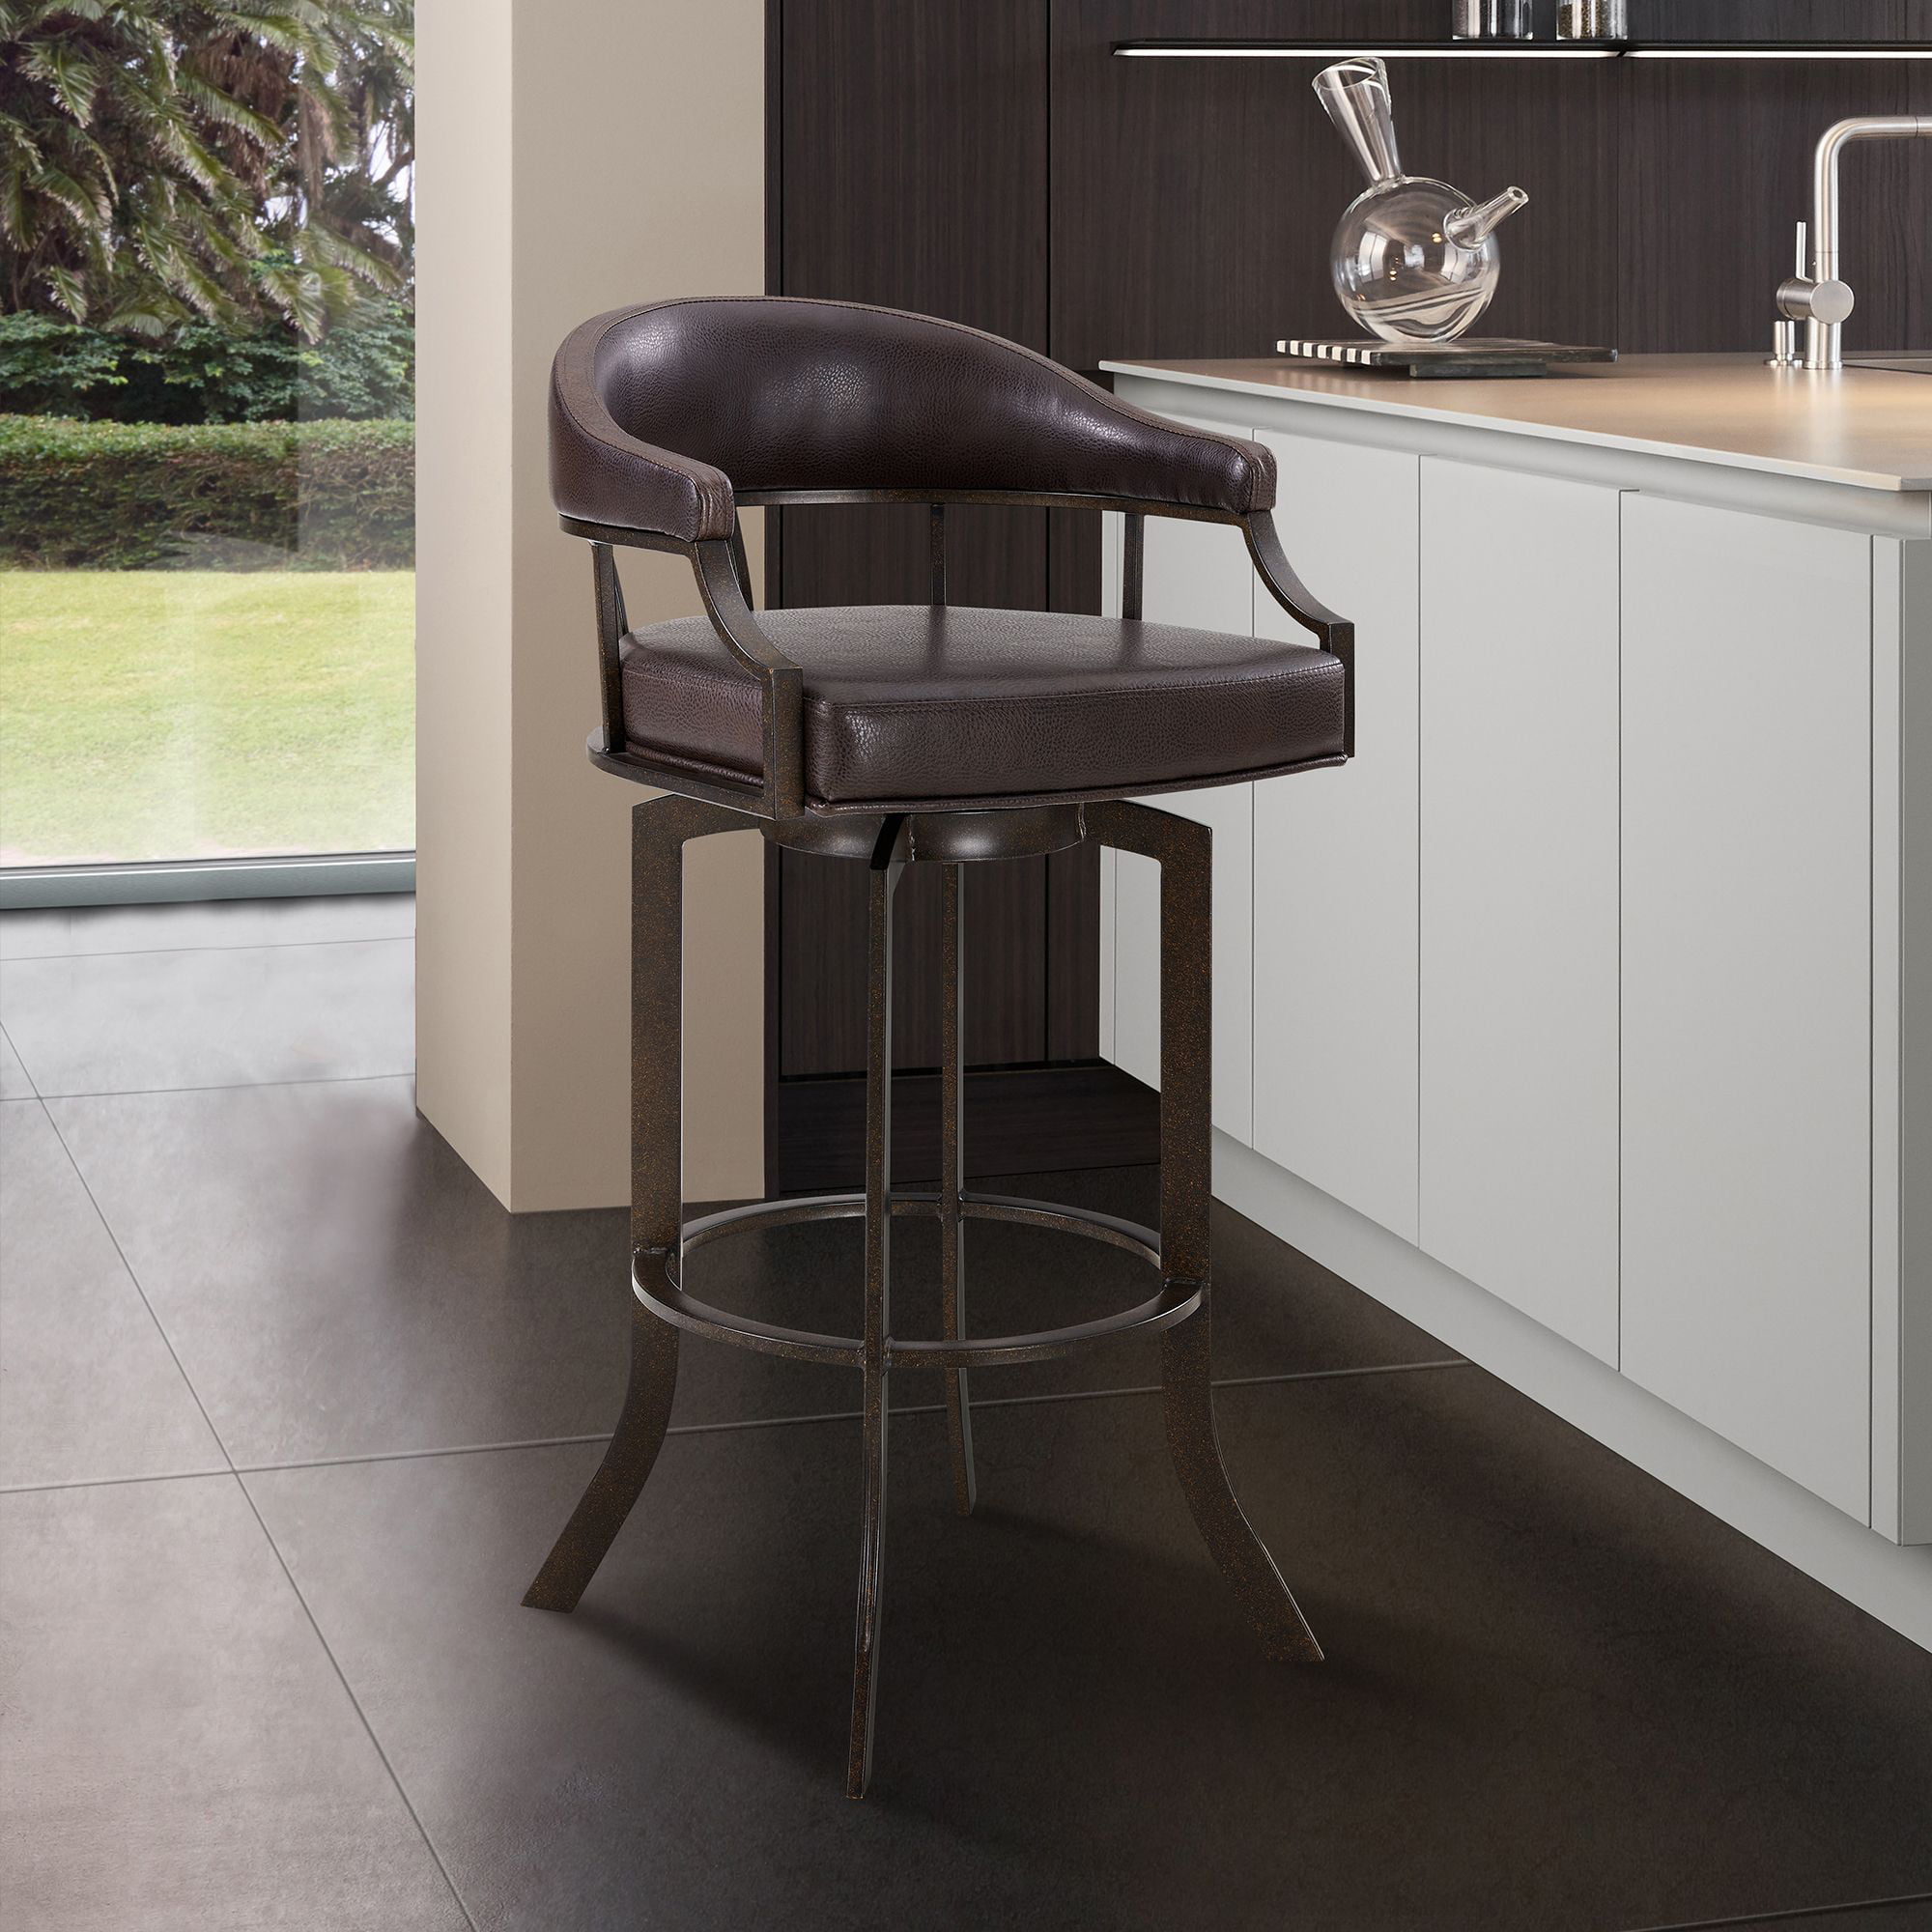 Amazing Brown Leather Counter Stool in the world Learn more here | stoolz